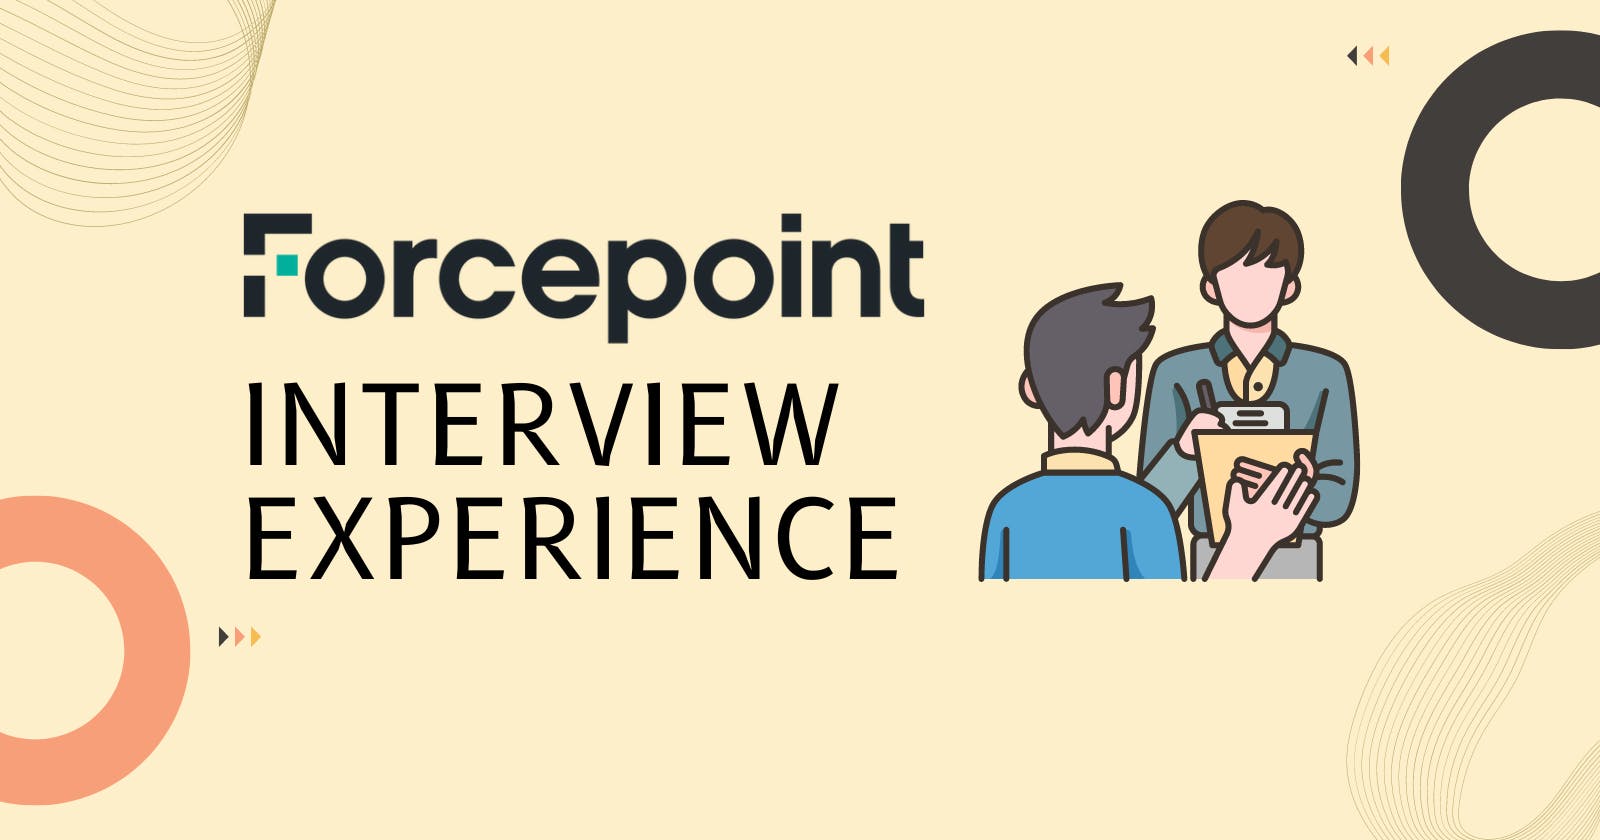 Forcepoint - Interview Experience